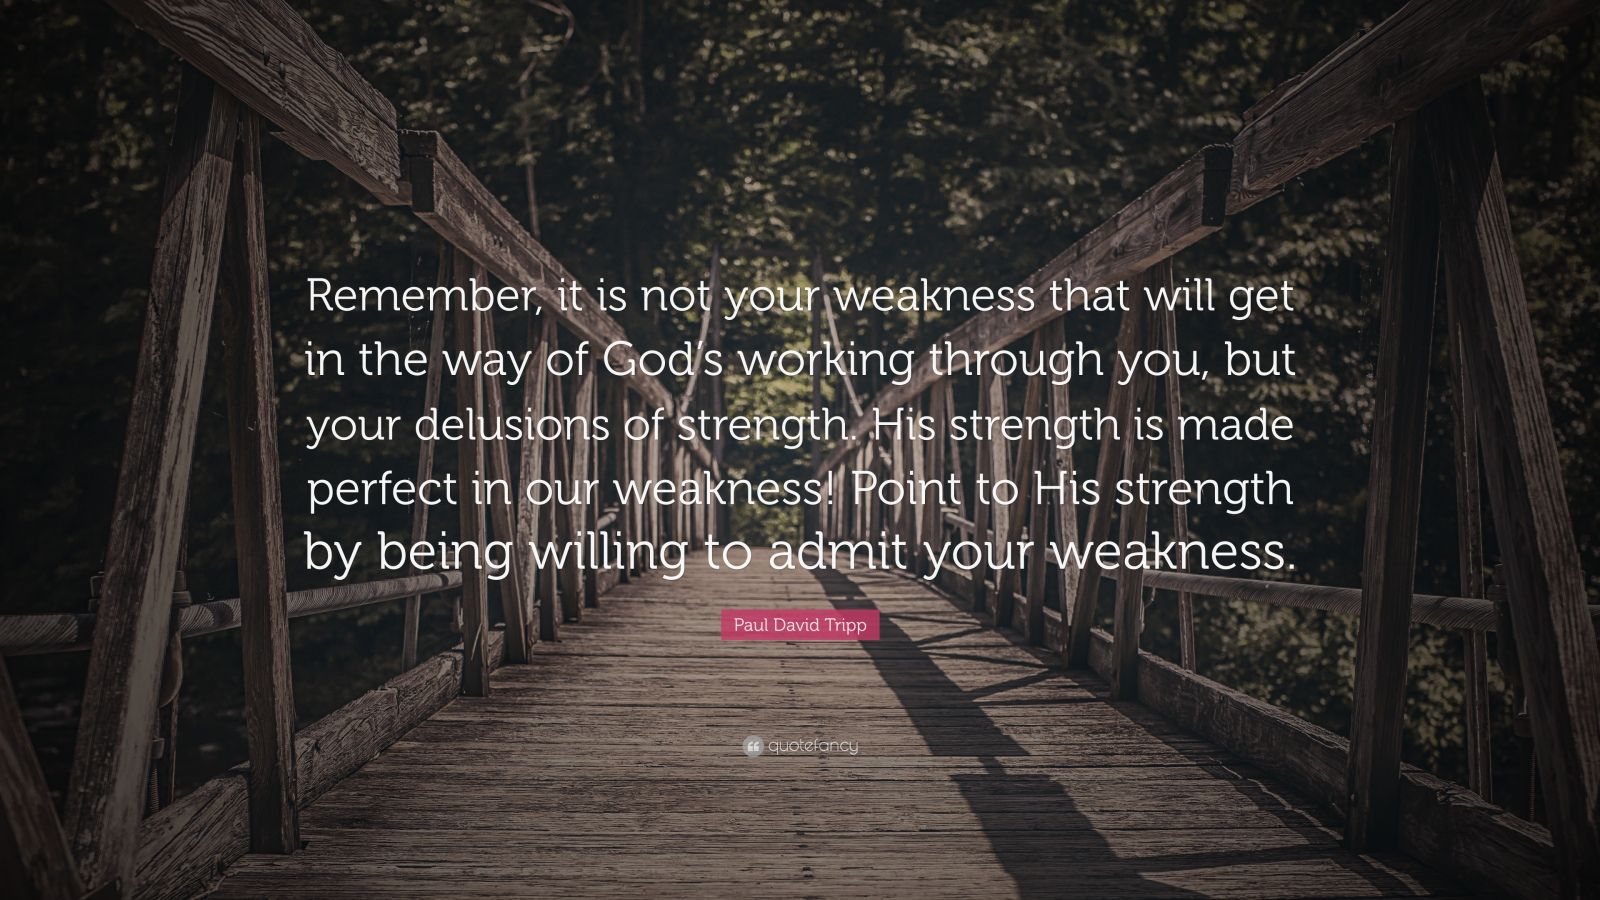 Paul David Tripp Quote: “Remember, it is not your weakness that will